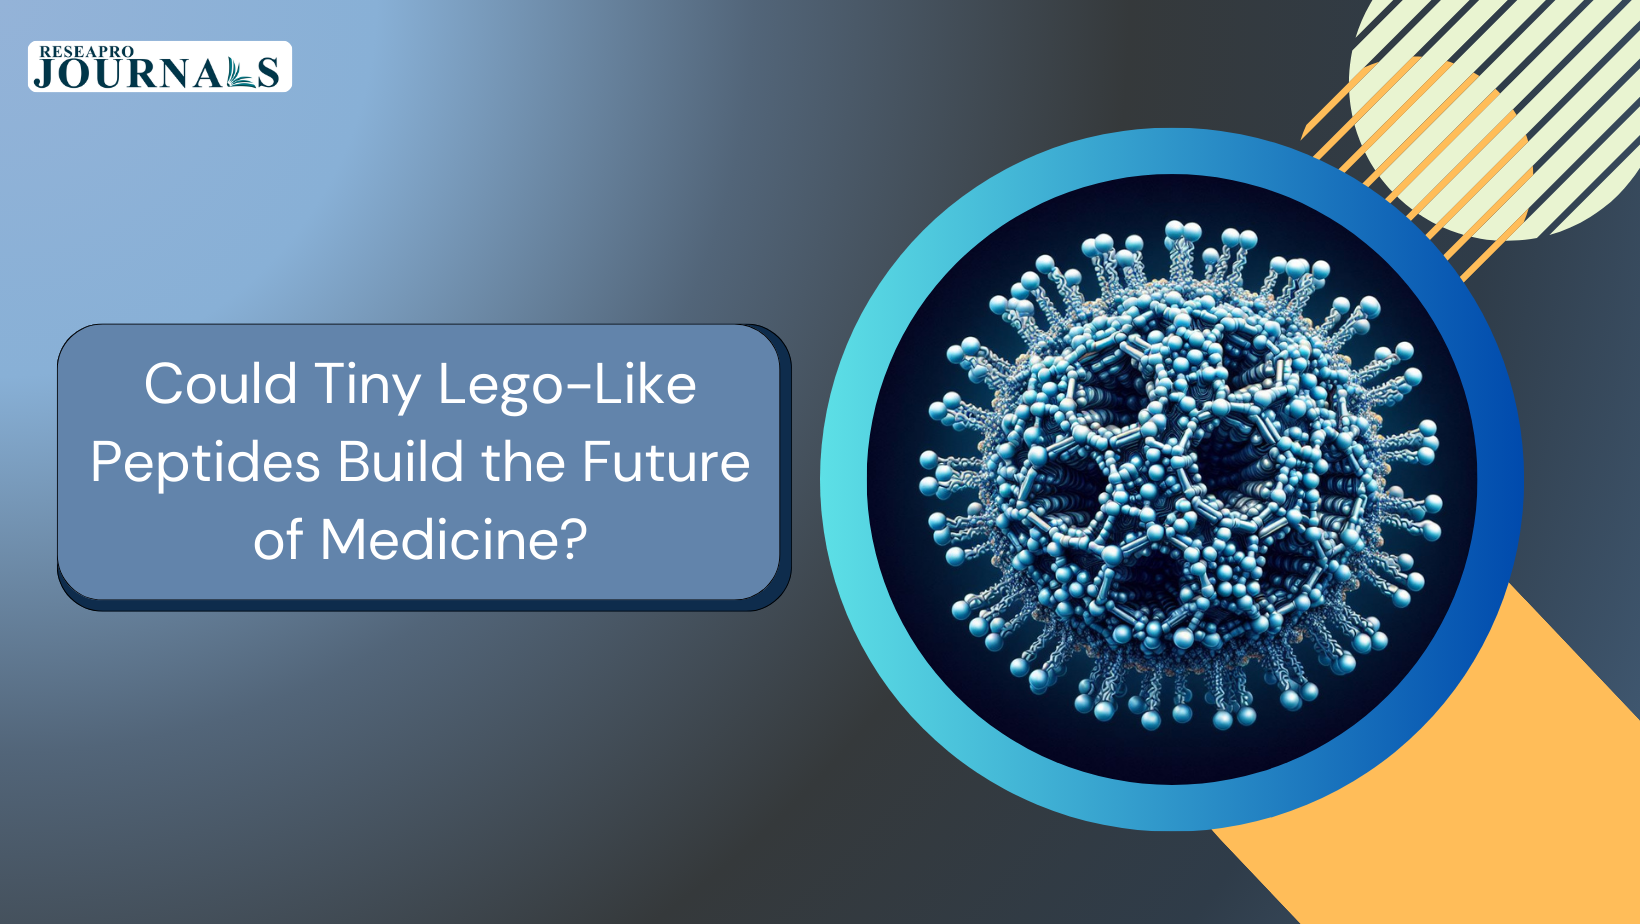 Could Tiny Lego-Like Peptides Build the Future of Medicine?